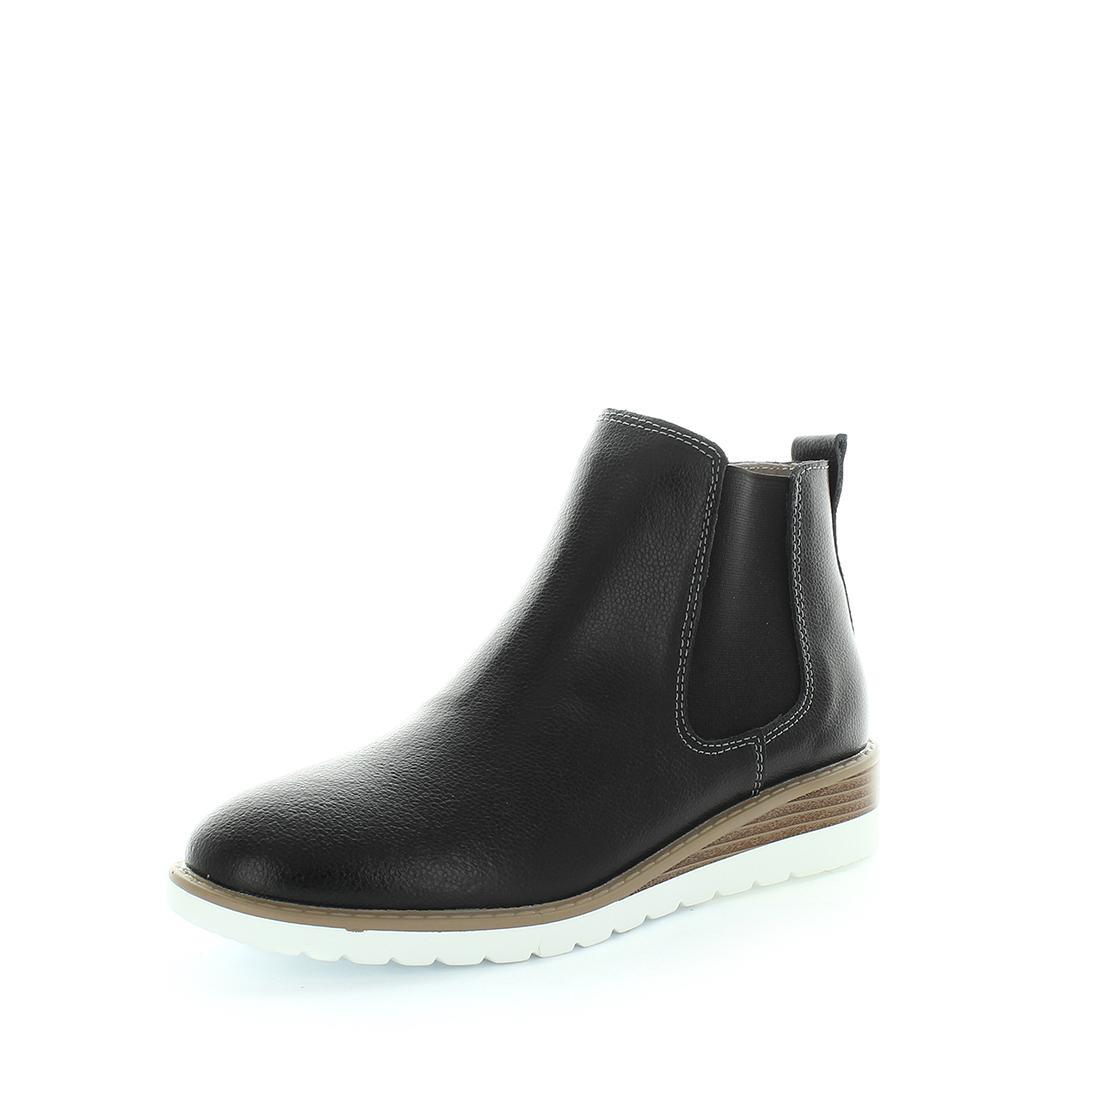 NEW Just Bee Coach Bootie Boot Women's Shoes